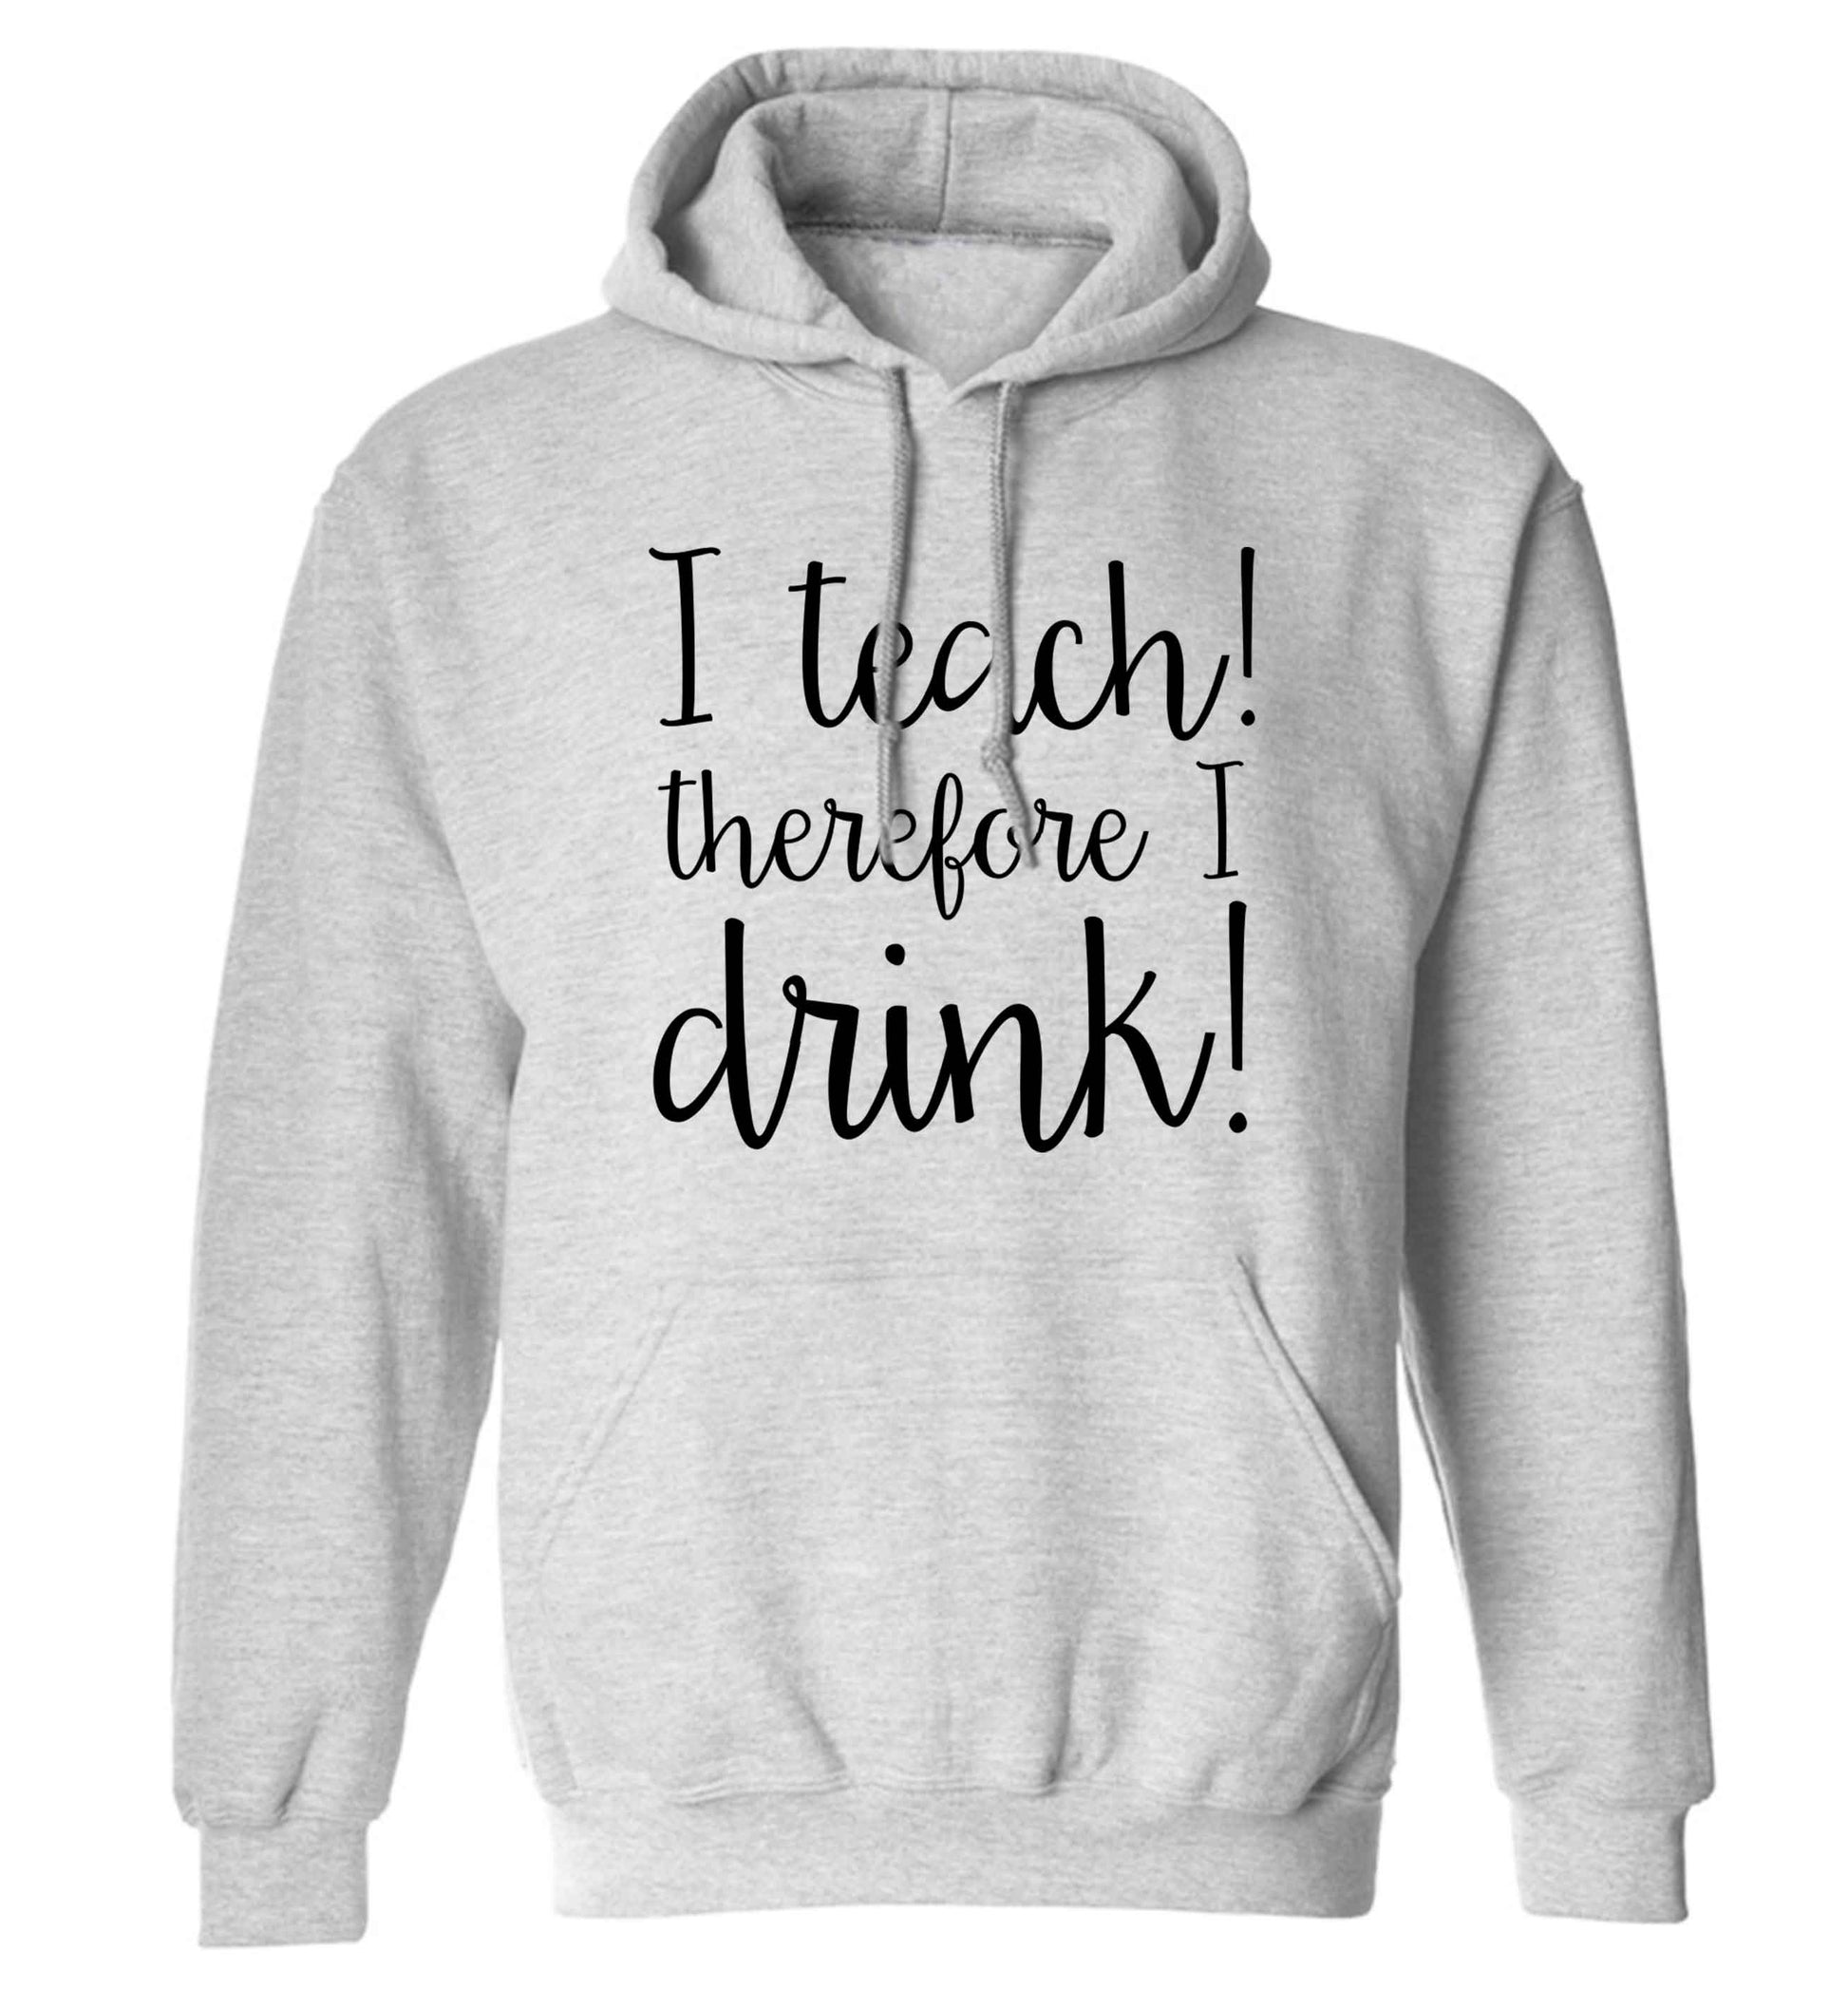 I teach therefore I drink adults unisex grey hoodie 2XL